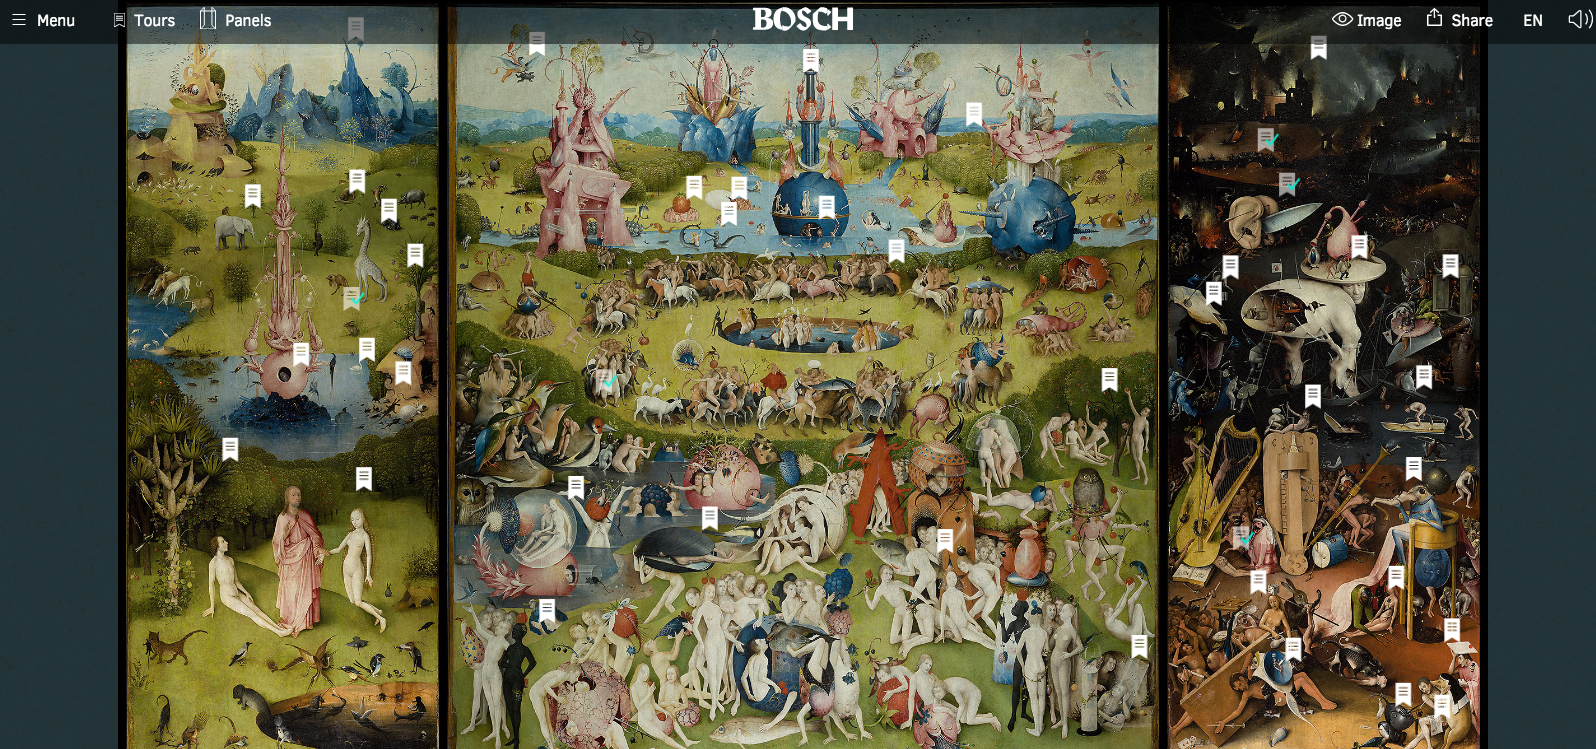 The Garden of Earthly Delights is one of Jheronimus Bosch's most famous paintings. Now this amazing high-def virtual tour of the painting will let you select sections of the famous print, along with written and audio notes about the piece.    <a href="https://tuinderlusten-jheronimusbosch.ntr.nl/en">Here</a>